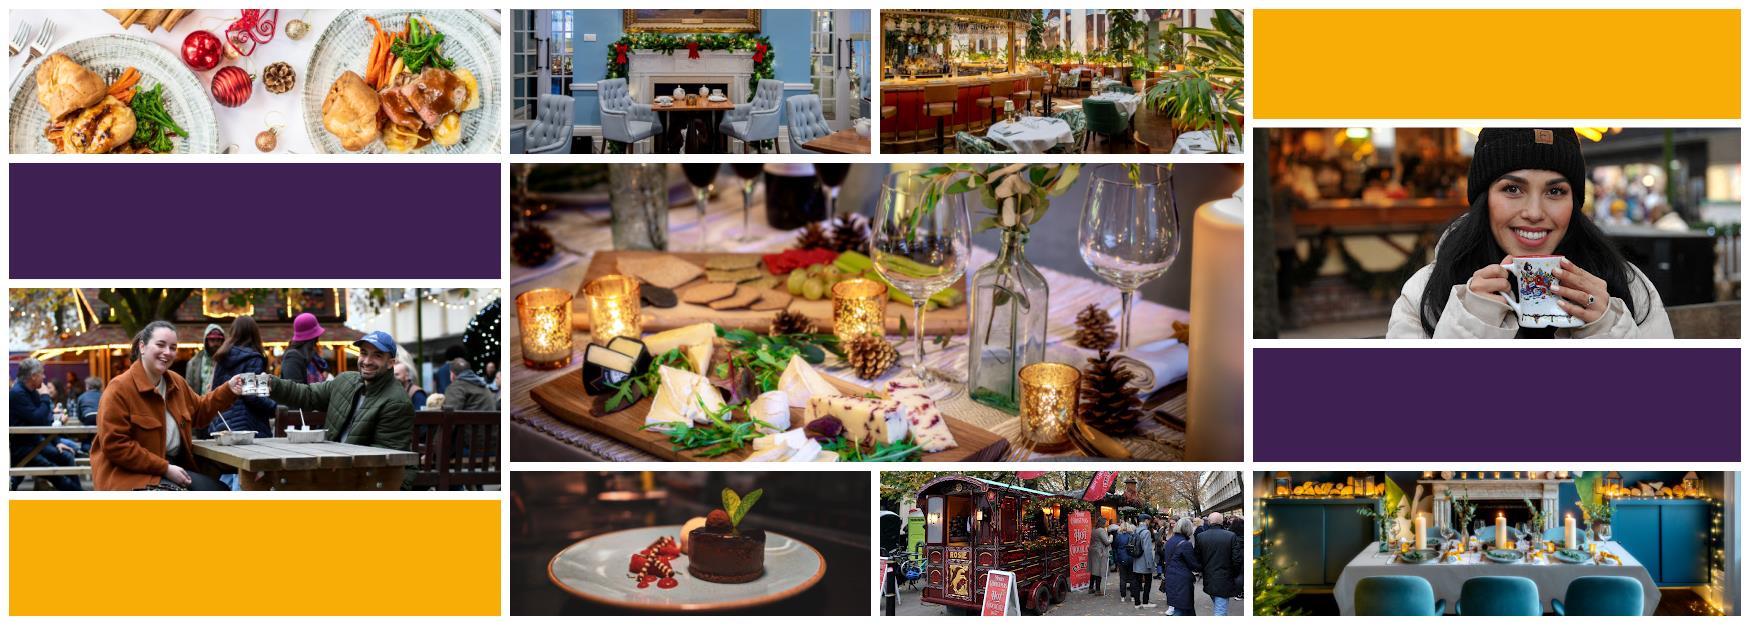 Christmas food & drink gift guide Cheltenham - collage of images